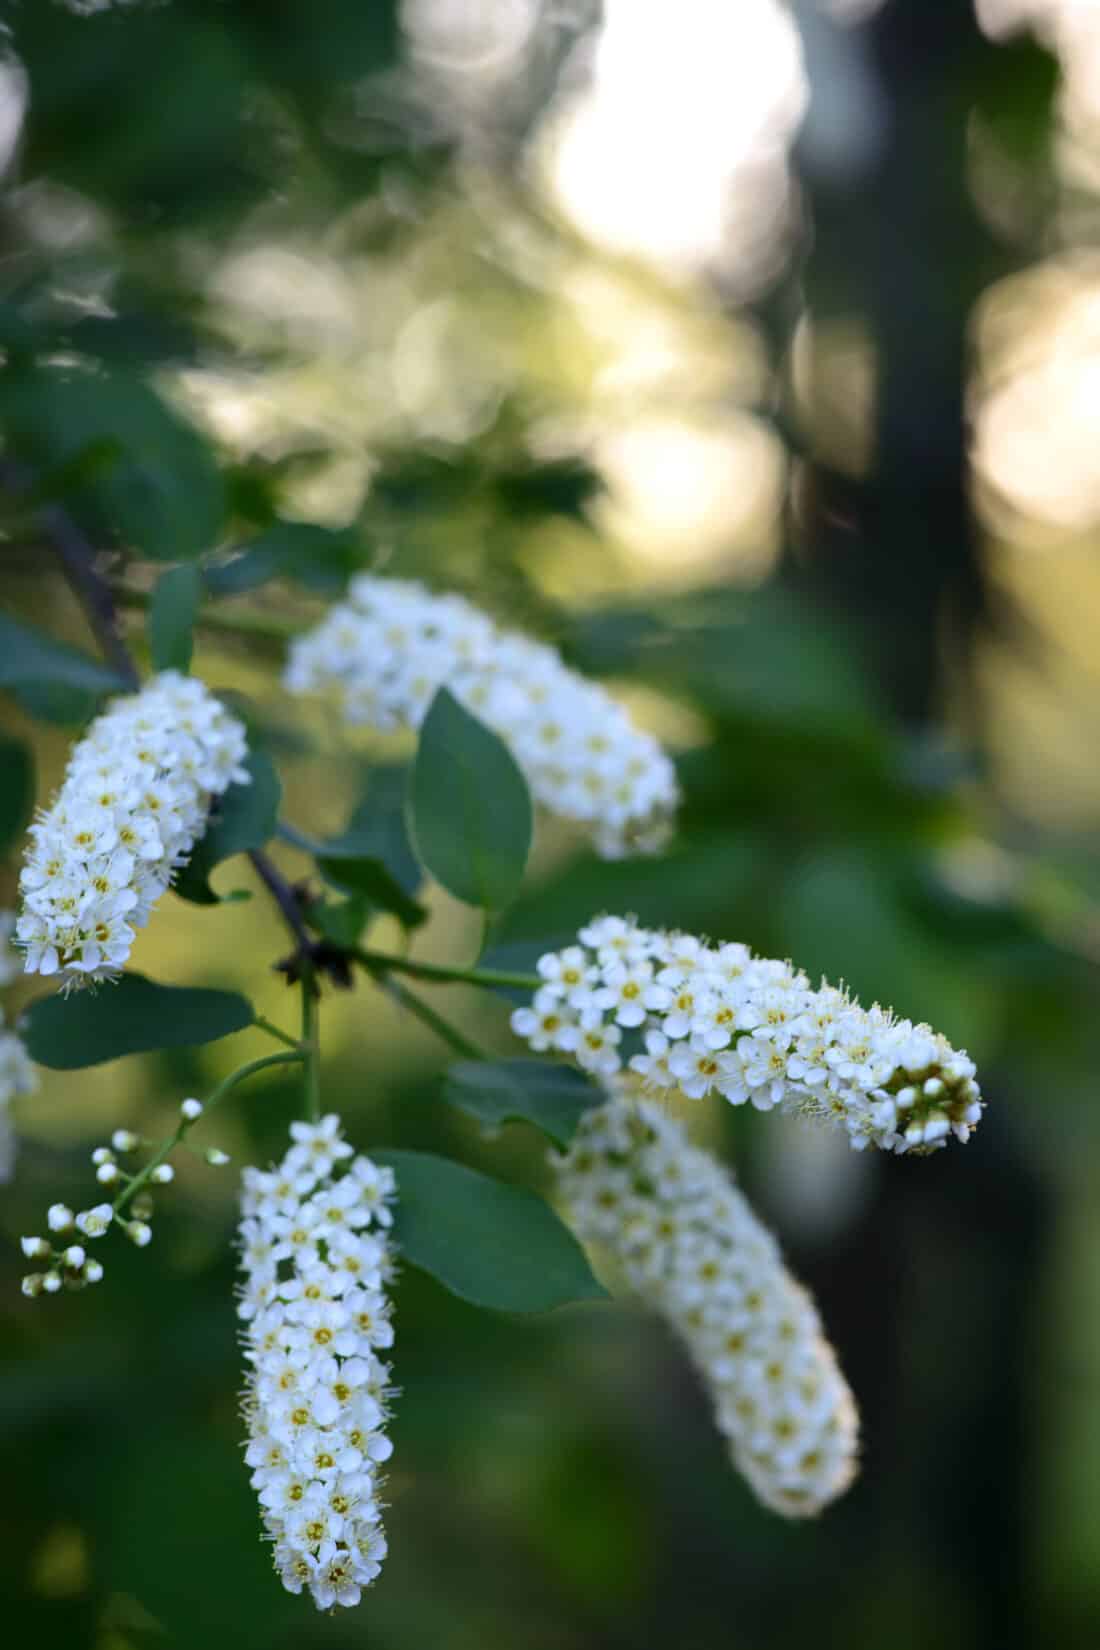 White flowers on a tree branch.